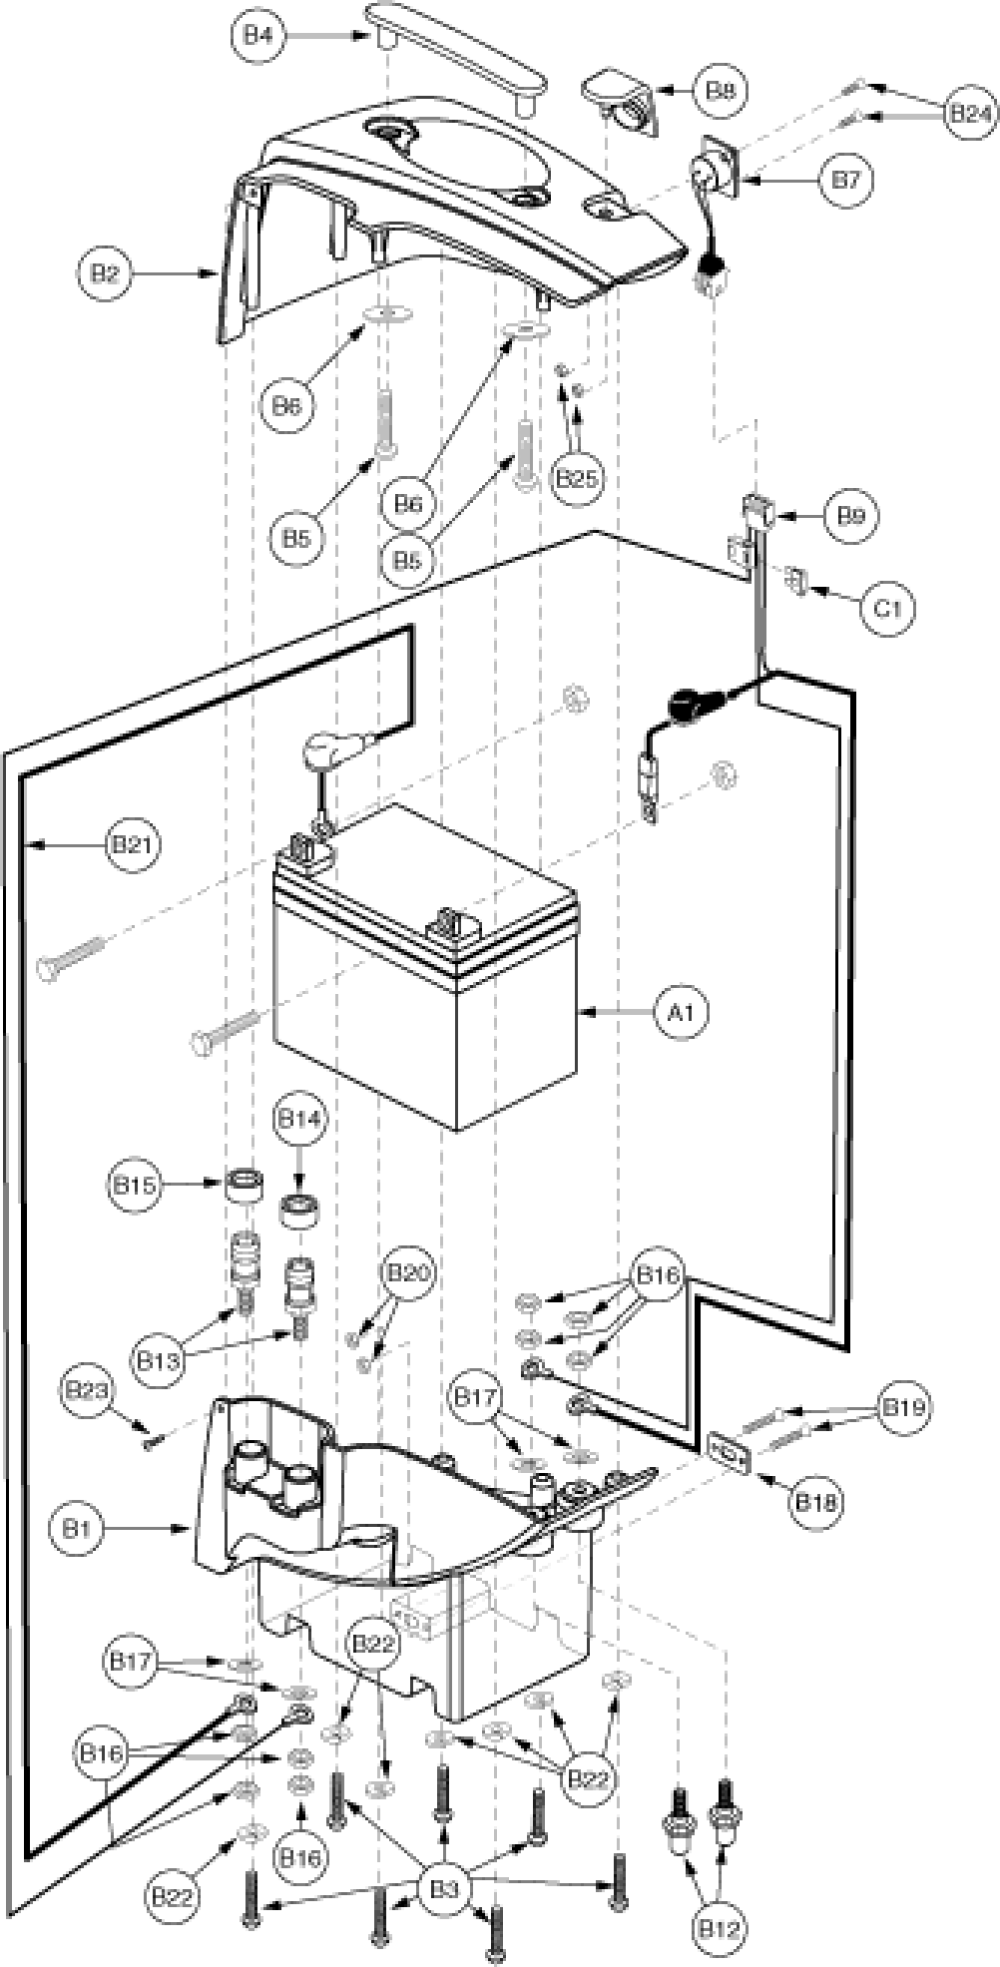 Electronics Assembly - Right Battery Box parts diagram